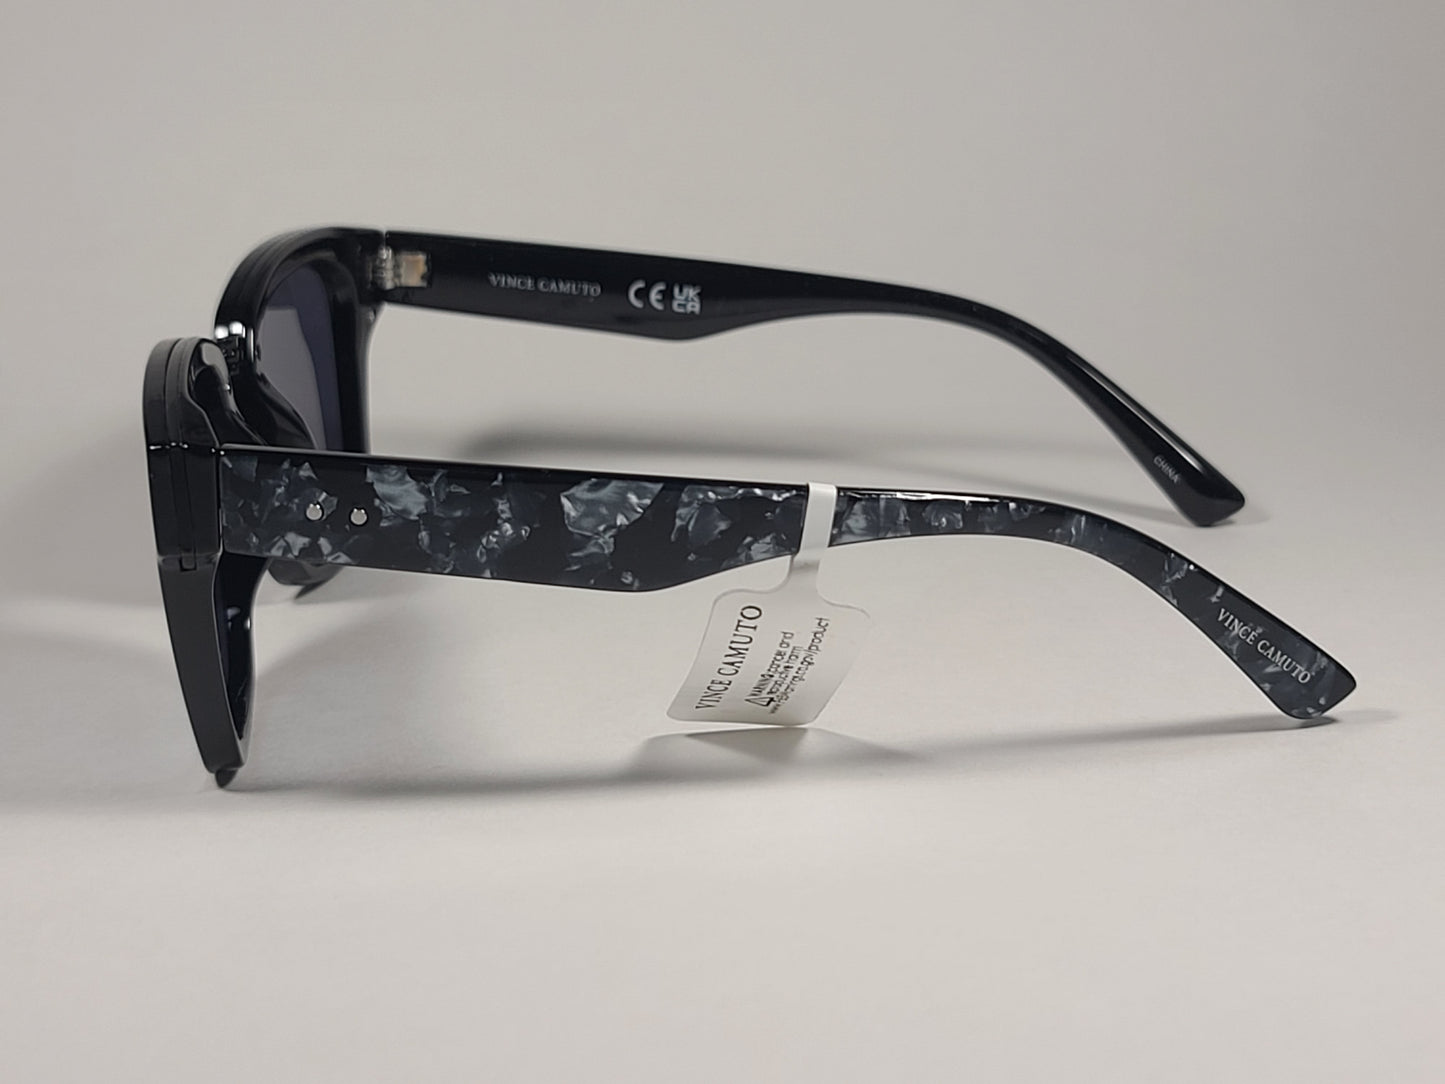 Vince Camuto VC974 OX Square Sunglasses Black Marble Frame Gray Tinted Lens - Sunglasses